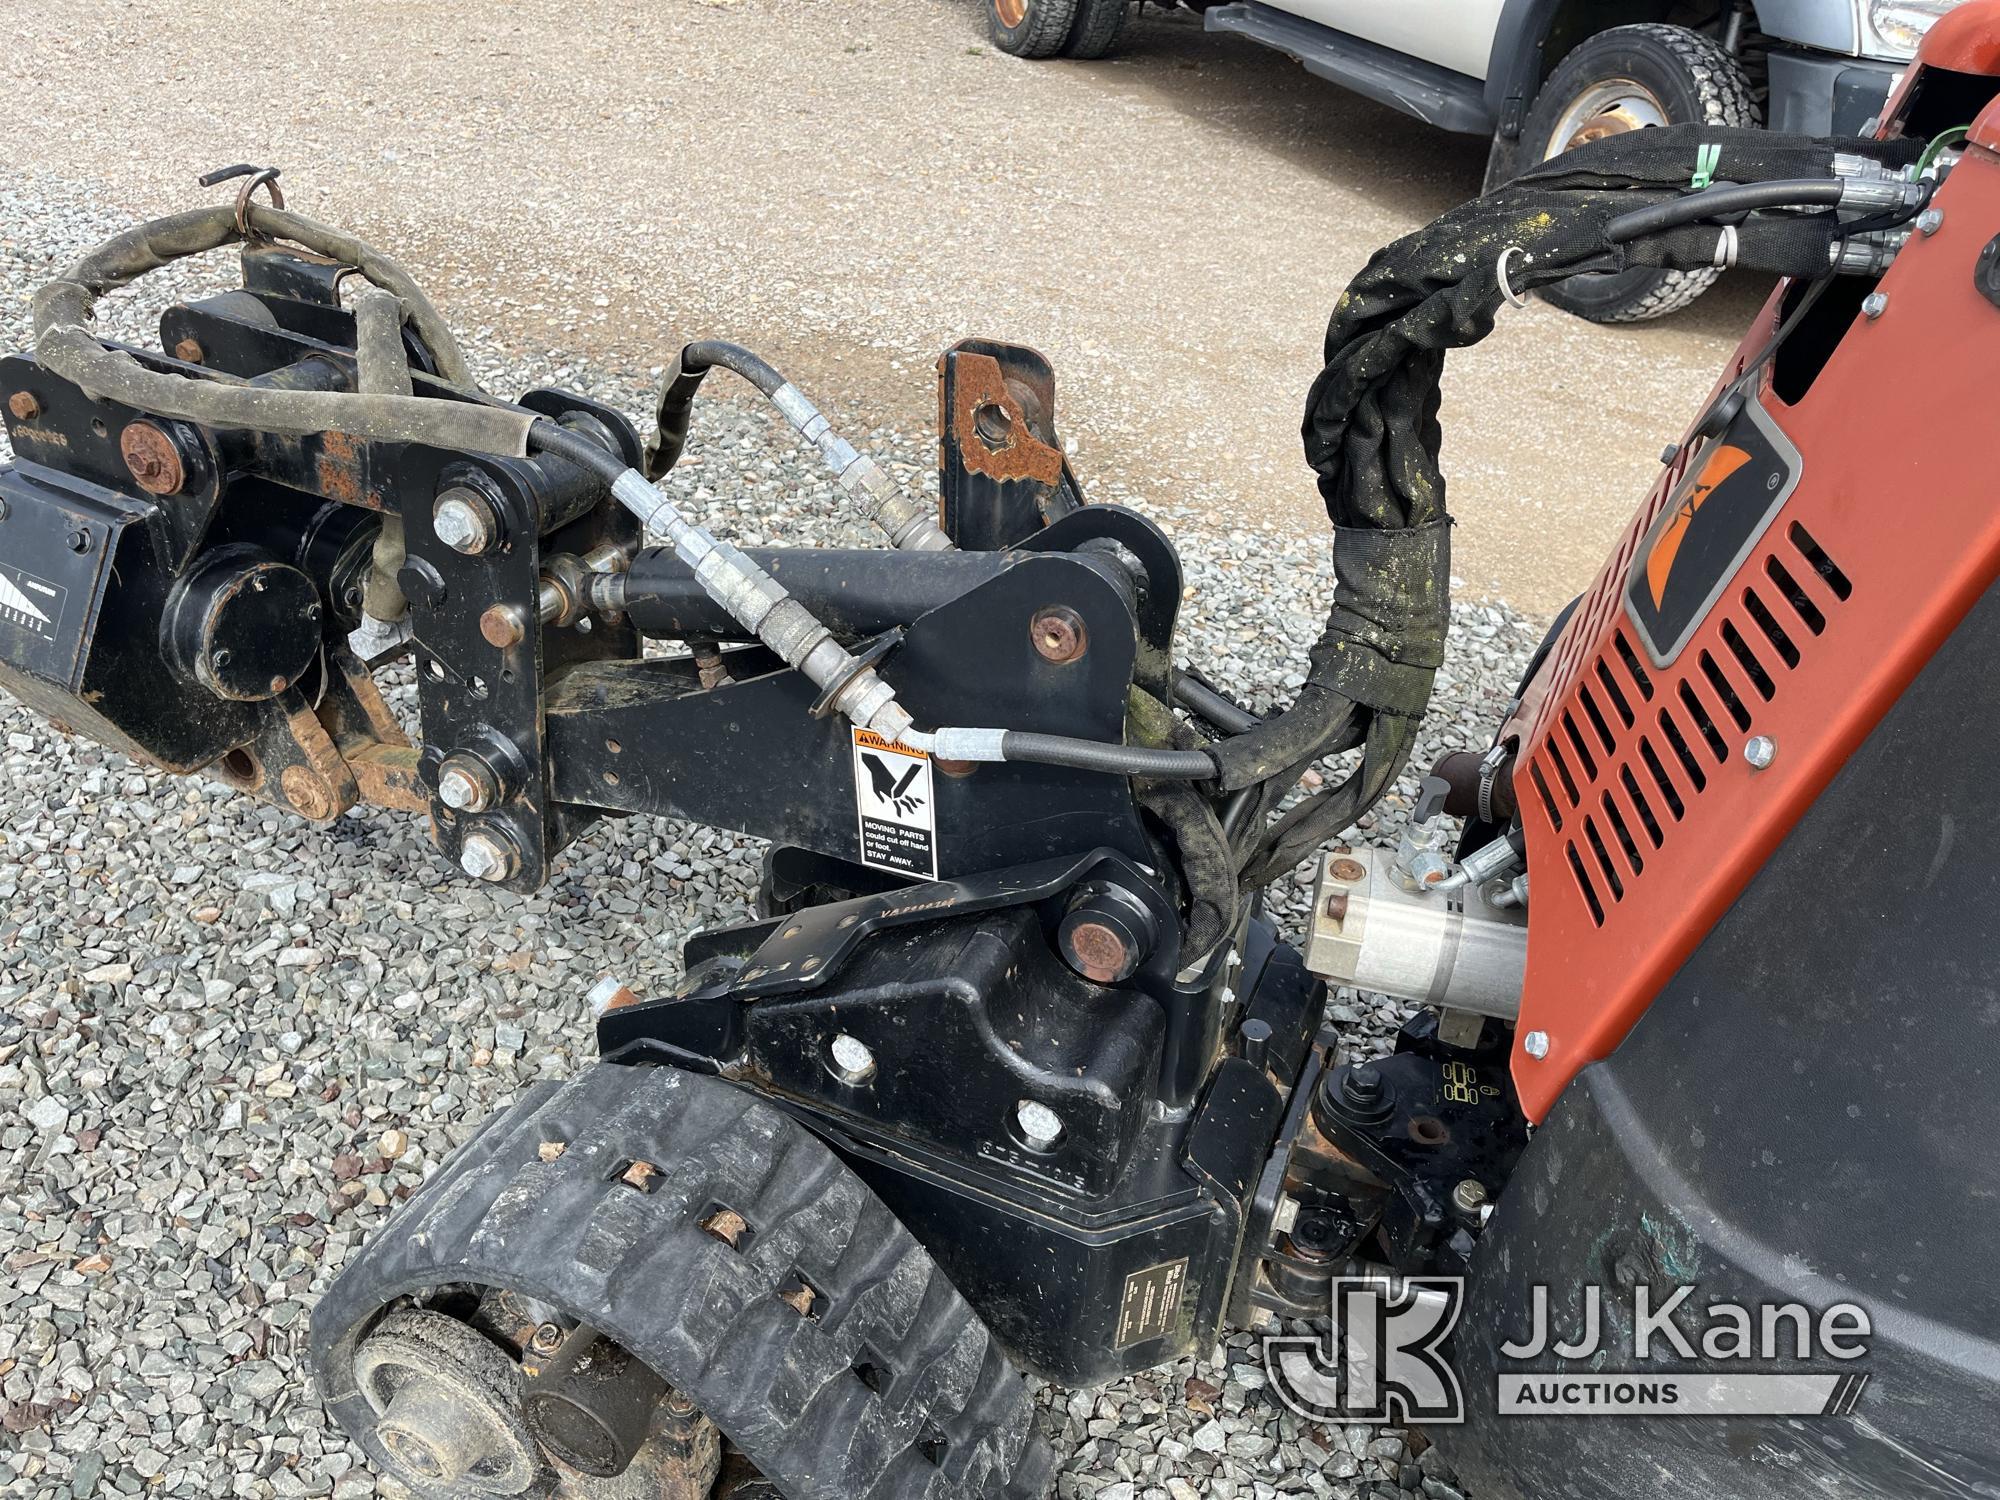 (Smock, PA) 2010 Ditch Witch R300 Quad Track Cable Plow Runs Rough, Moves & Operates, Requires Jump